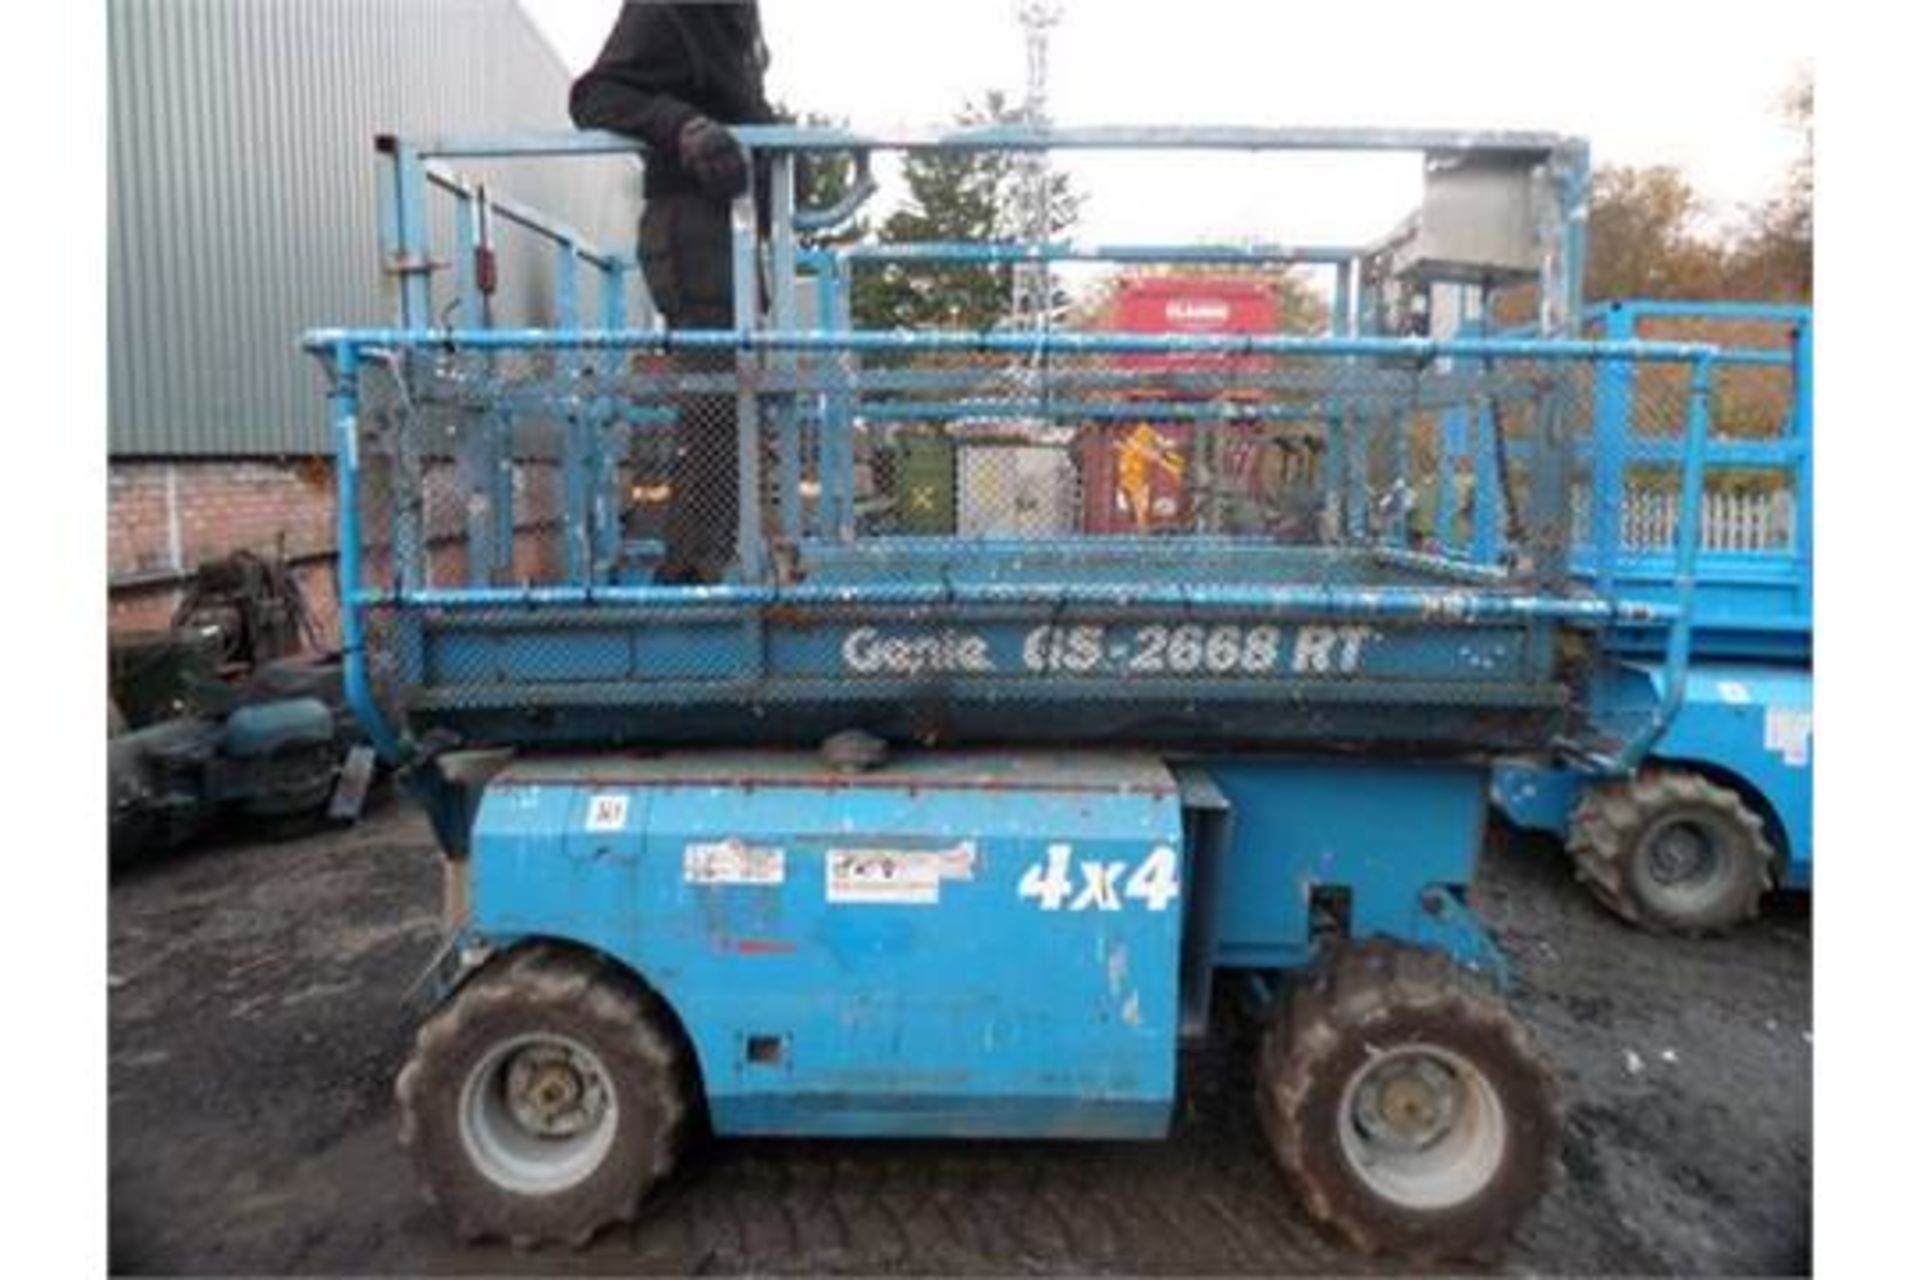 GENIE GS 2668 RT {015141} 4X4 Diesel Scissor Lift Powered by kubota D905 engine and SWL on - Image 2 of 4